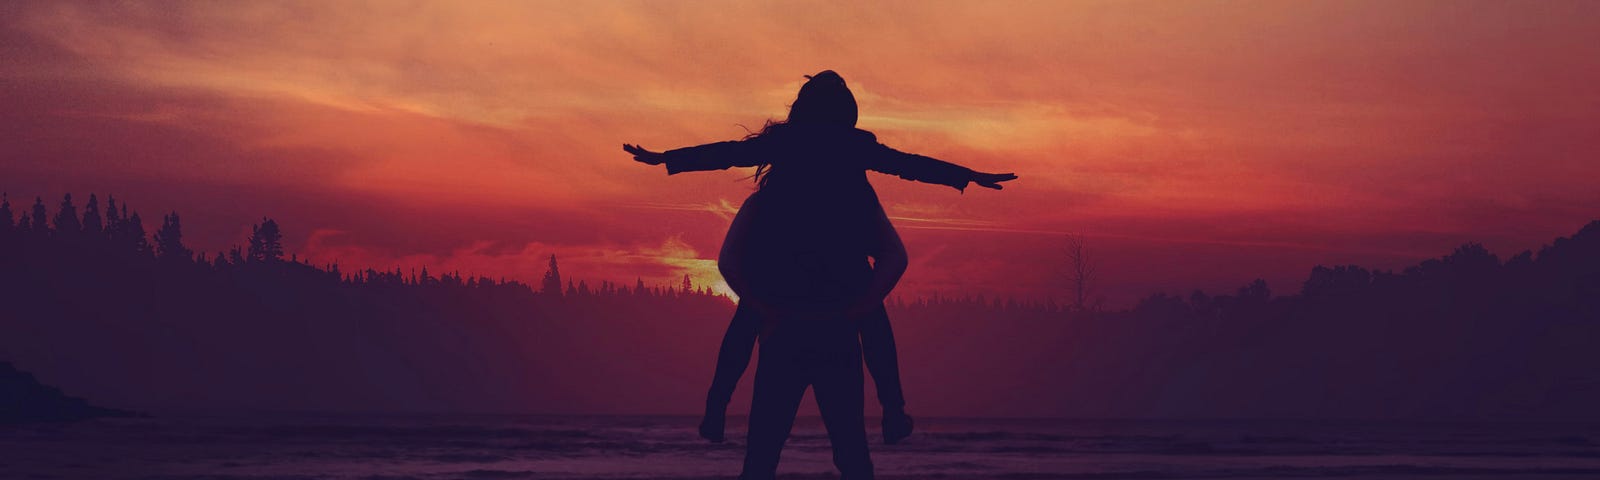 a silhouette of a man balancing a woman on his shoulders against a sunset back drop